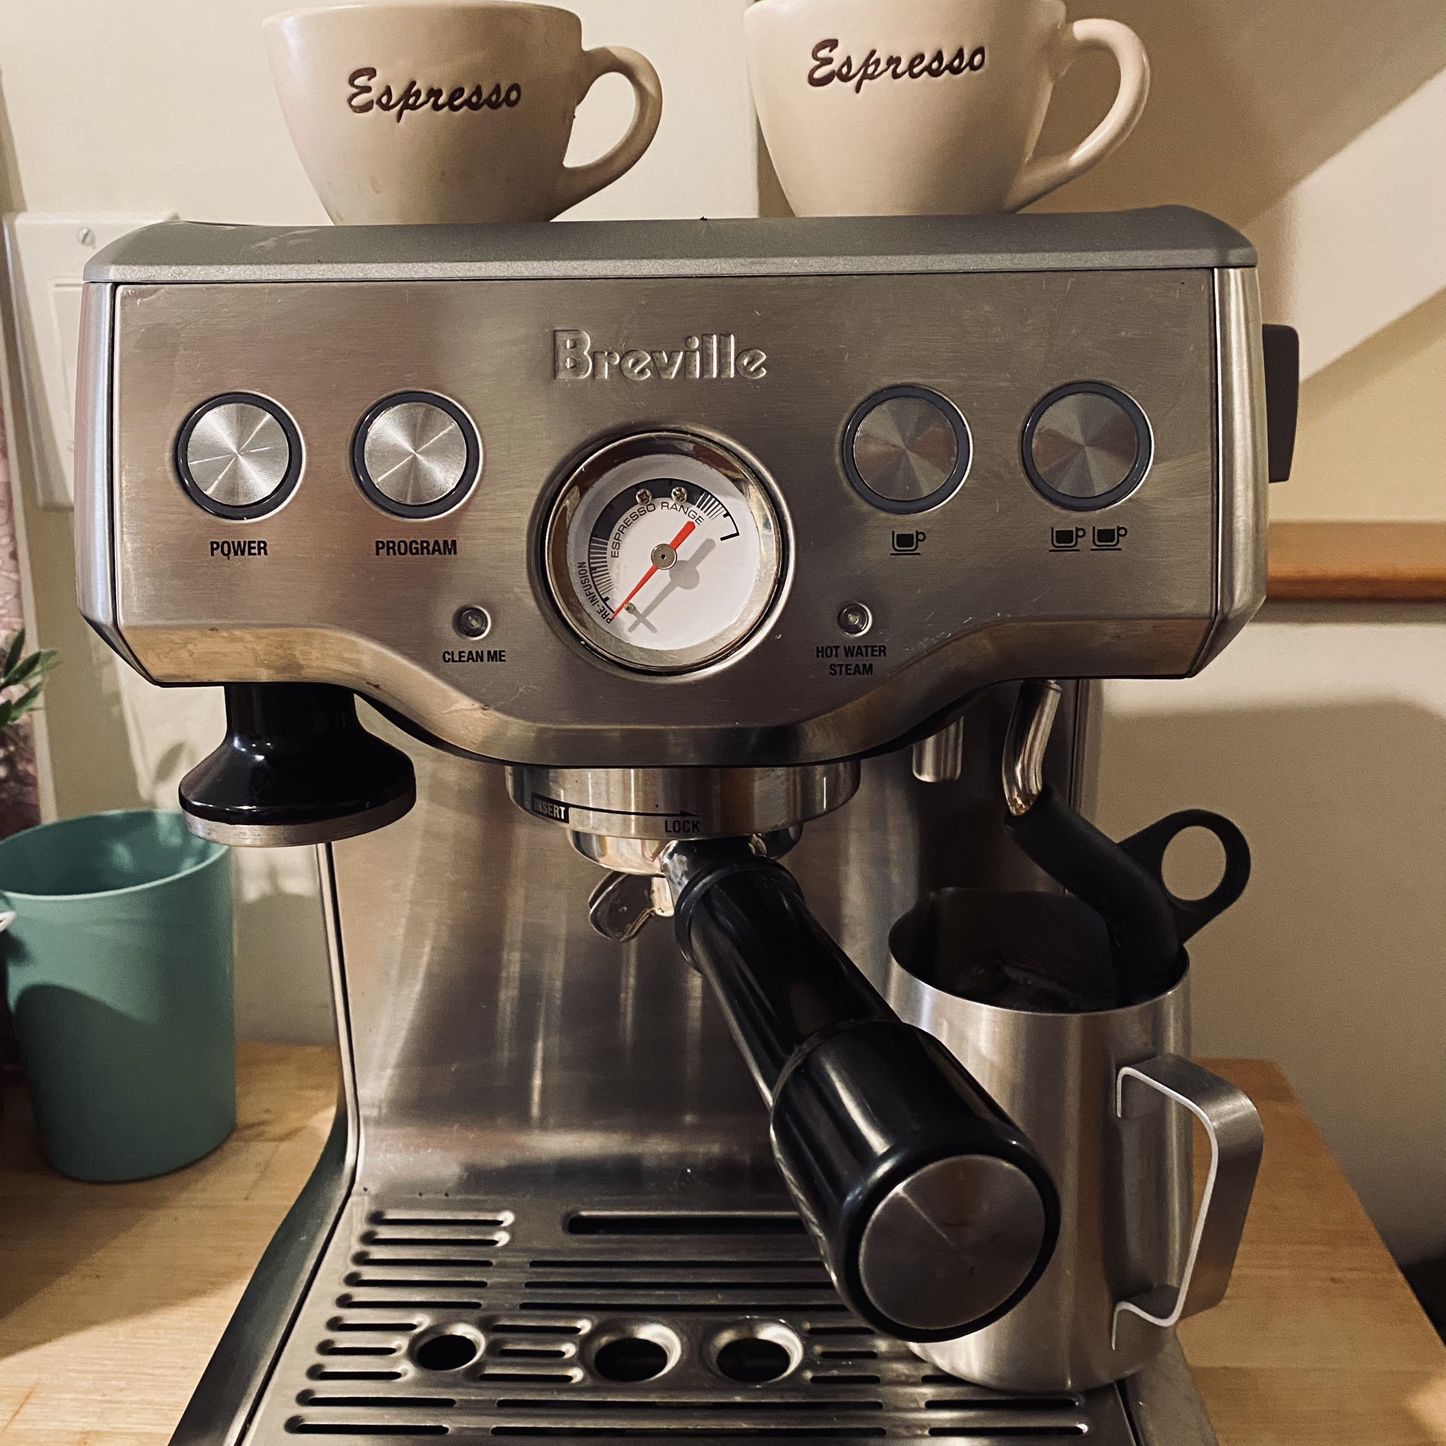 Breville Espresso Machine And Accessories for Sale in Brooklyn, NY - OfferUp